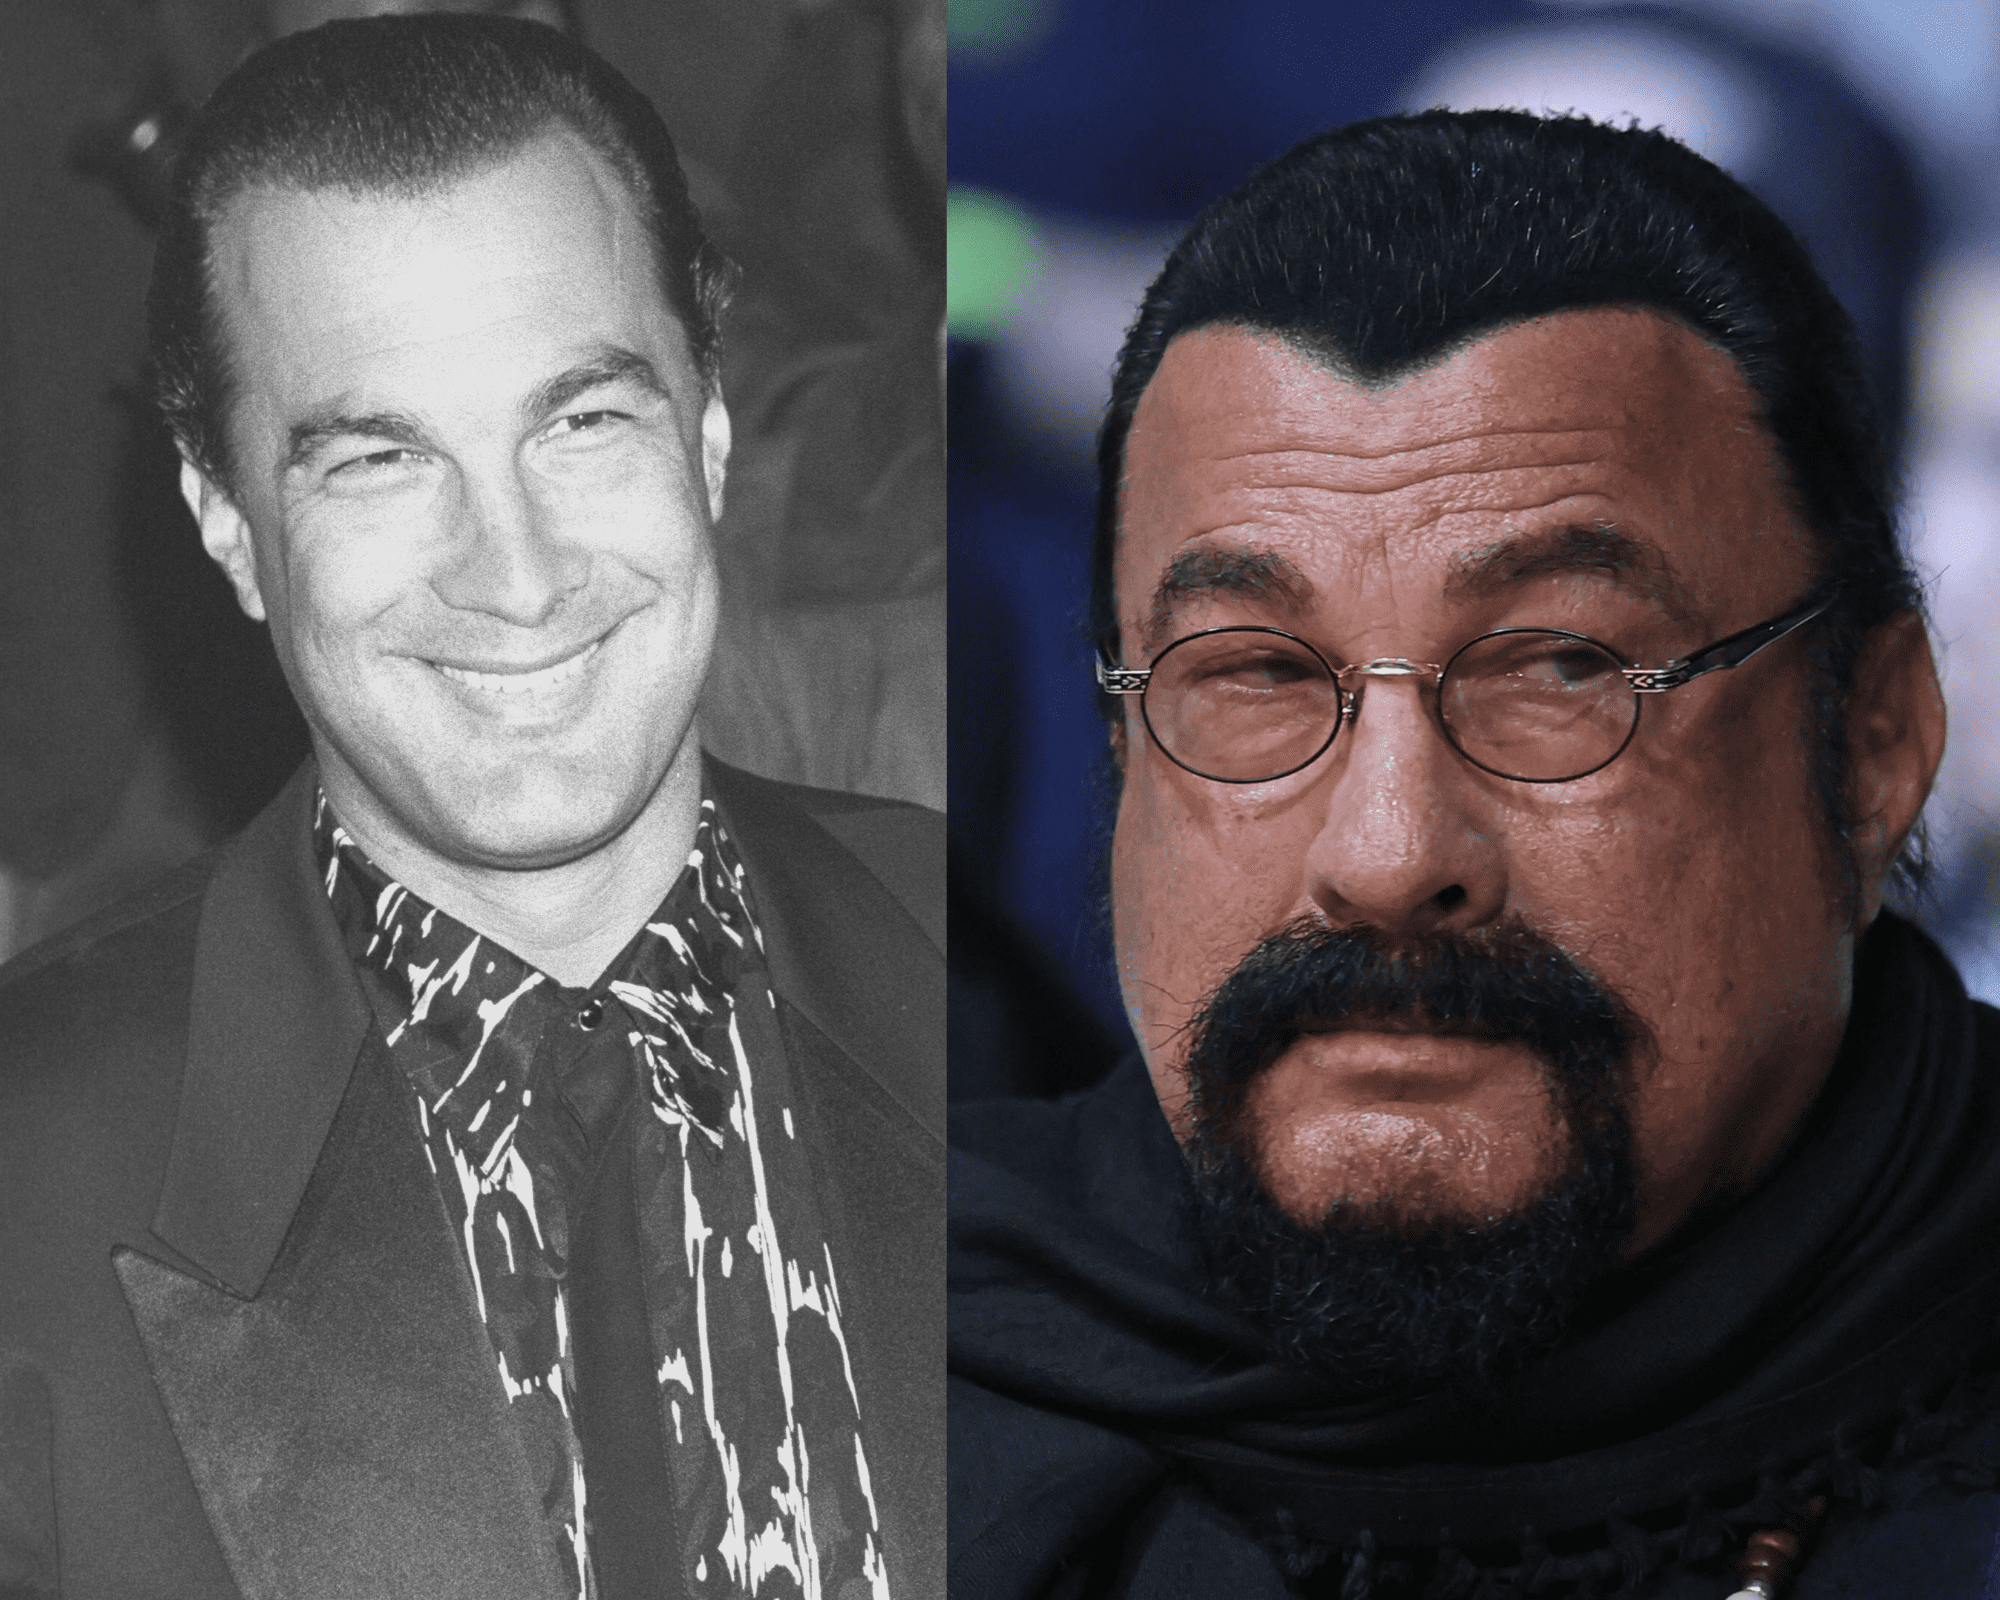 Actor Steven Segal on November 25, 1992 in Hollywood | Steven Seagal at the Etihad Arena in Abu Dhabi on October 22, 2022 | Source: Getty Images 